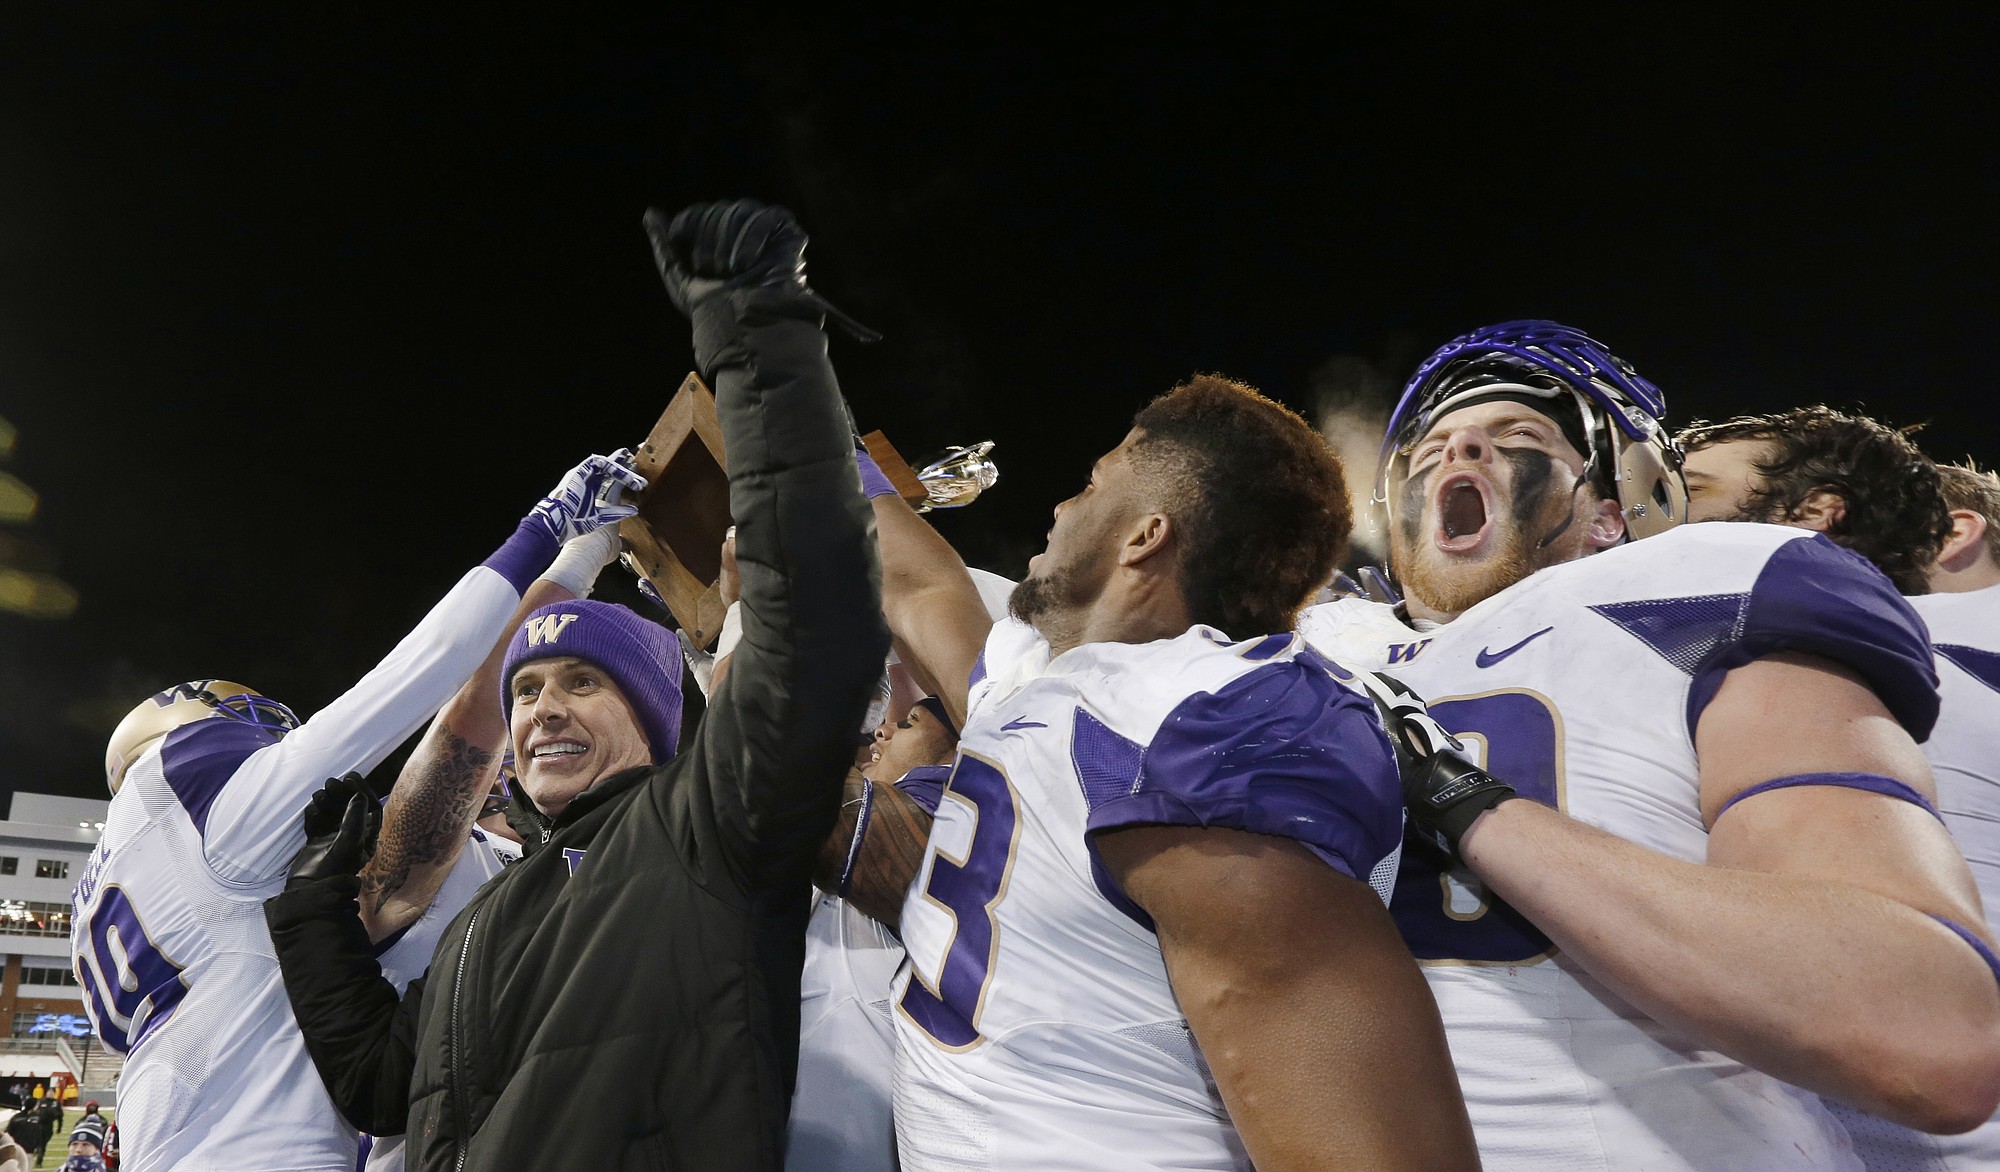 Washington coach Chris Petersen, left, celebrates with players Saturday, Nov. 29, 2014, in Pullman, after Washington defeated Washington State 31-13 in the Apple Cup. (AP Photo/Ted S.